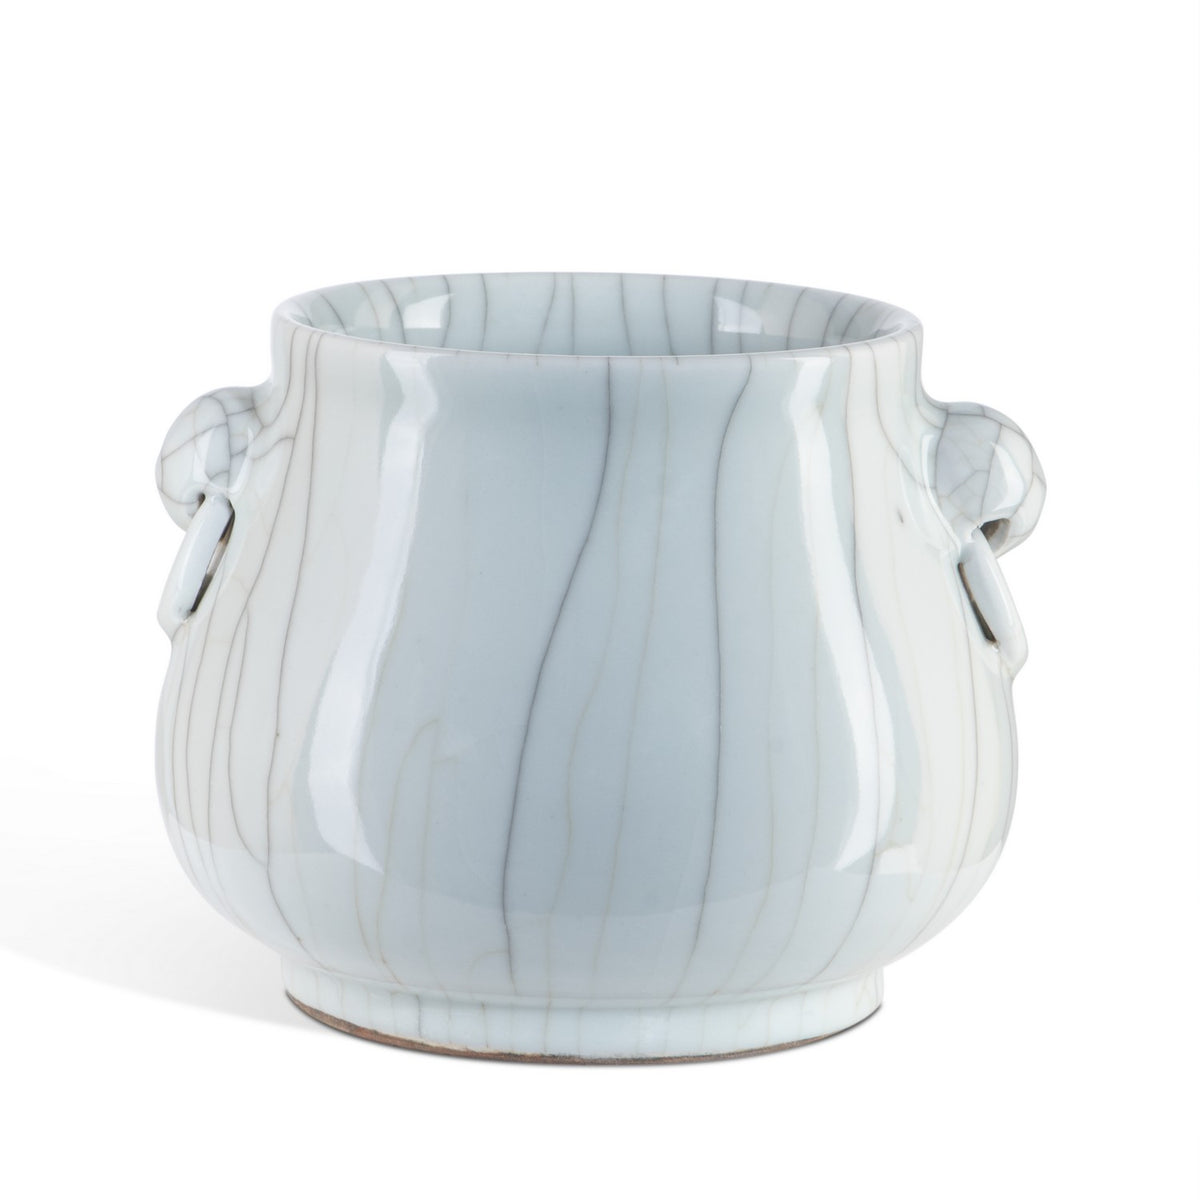 Currey and Company Planter from the Celadon collection in Celadon Crackle finish